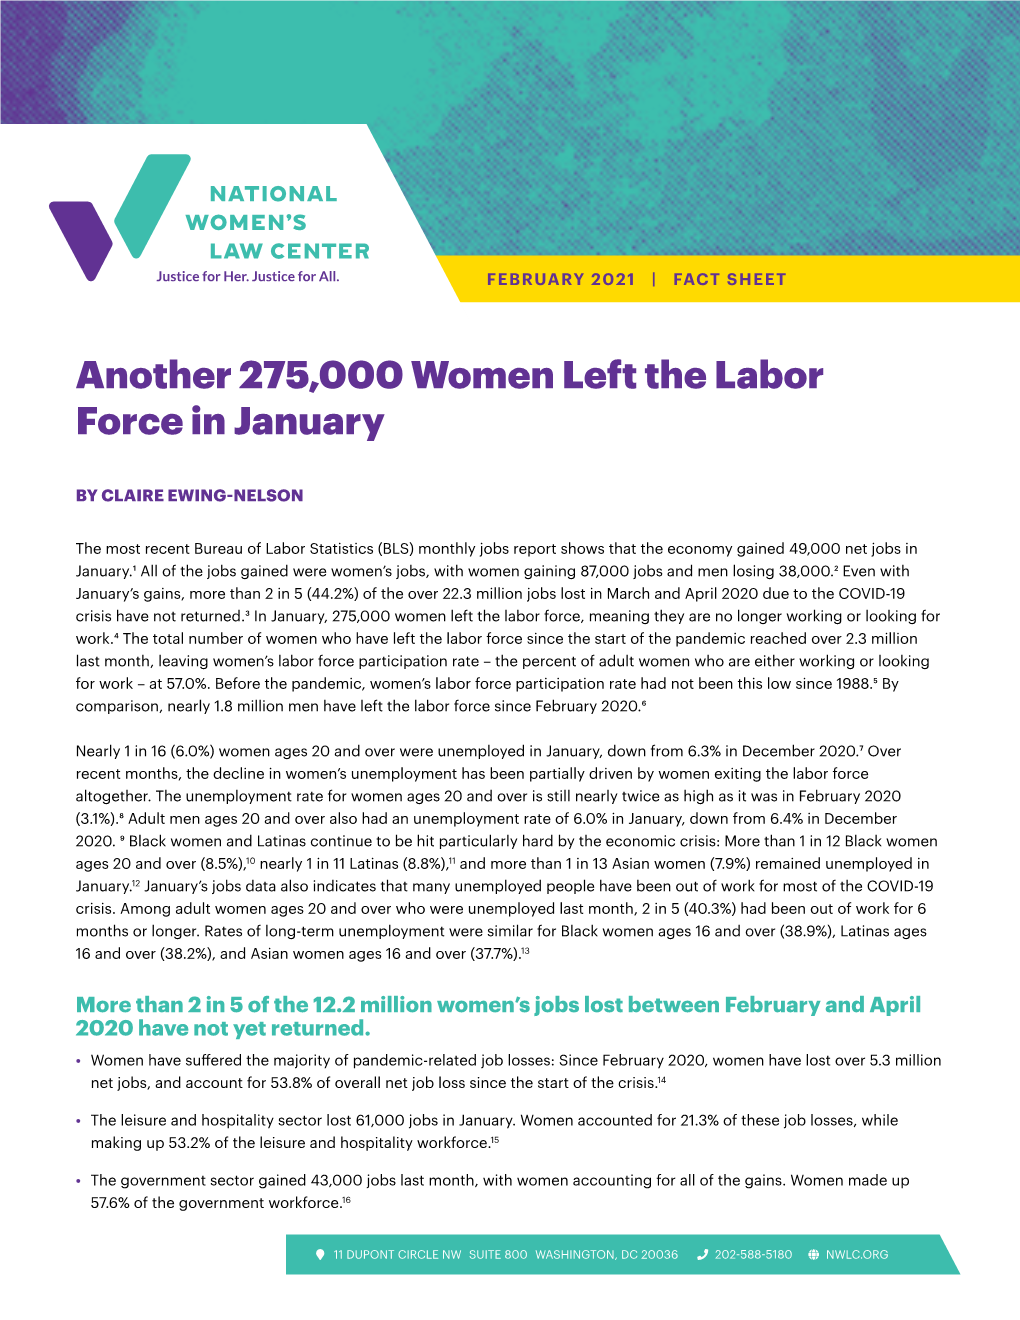 Another 275,000 Women Left the Labor Force in January